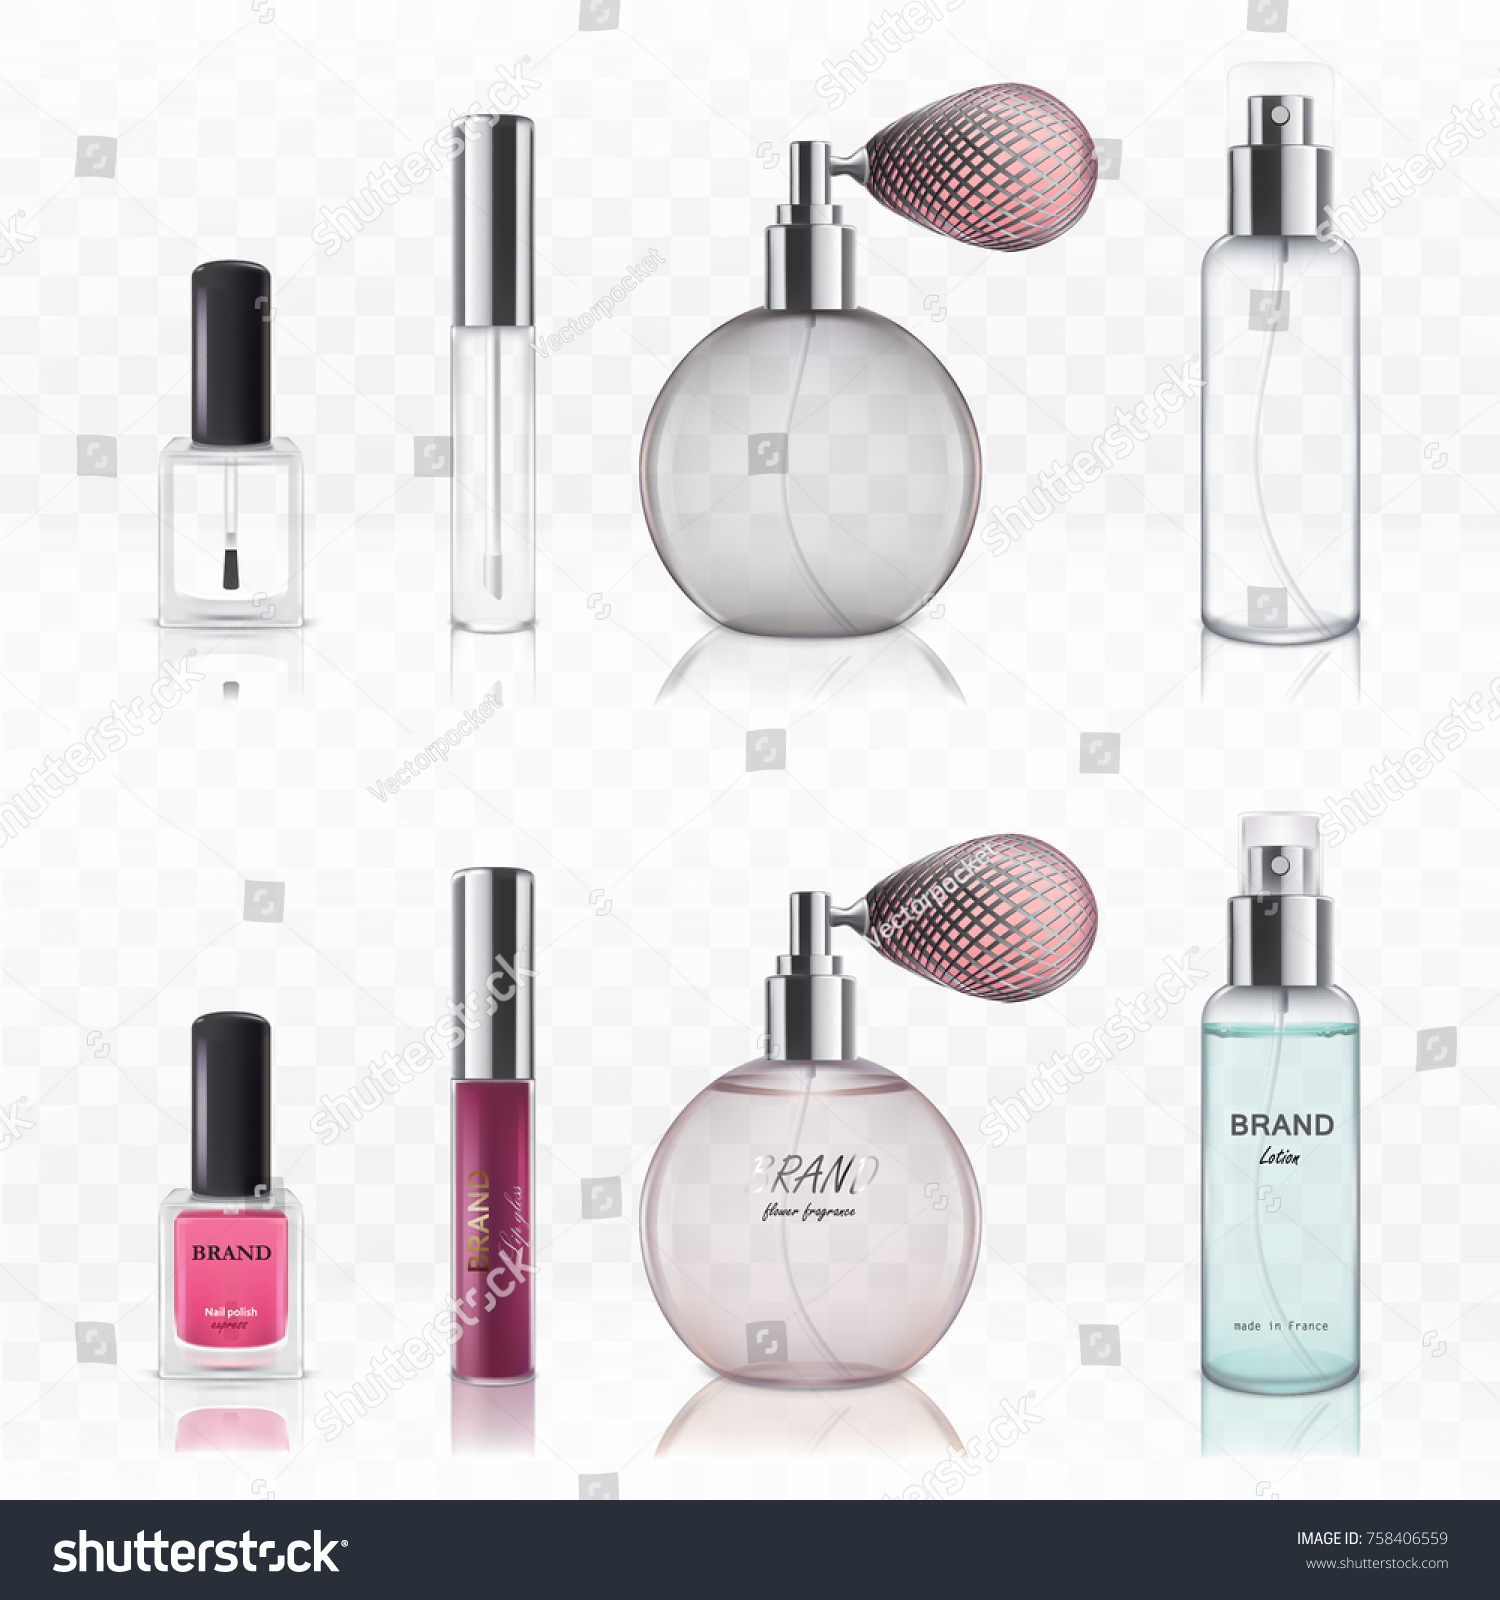 SVG of Empty and full glass cosmetic bottles for lipstick, nail polish, for perfume isolated on white background in a realistic style. Set of vector illustrations svg